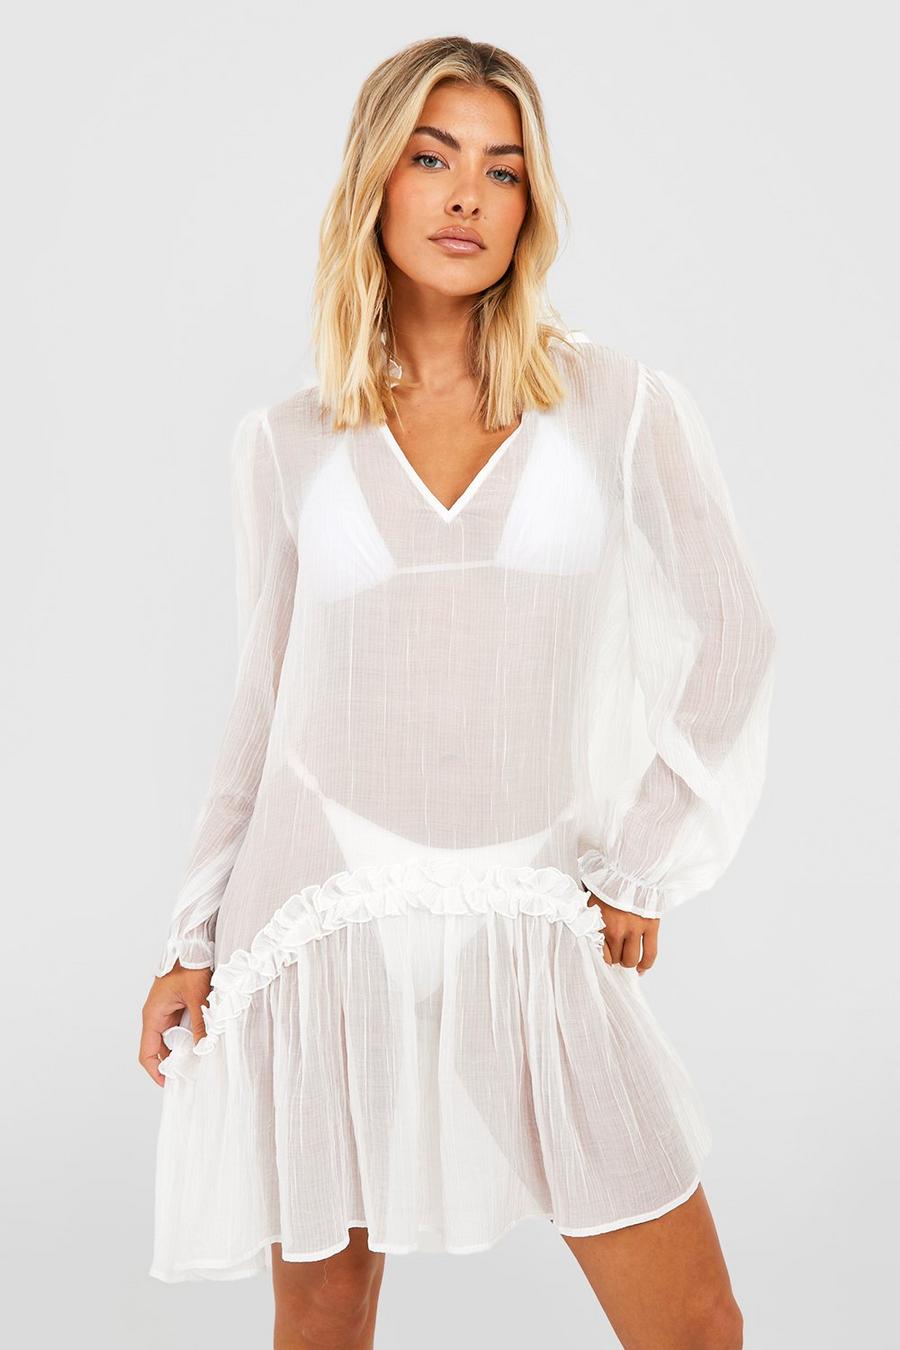 Cream Sheer Texture Ruffle Beach Cover-up Dress image number 1